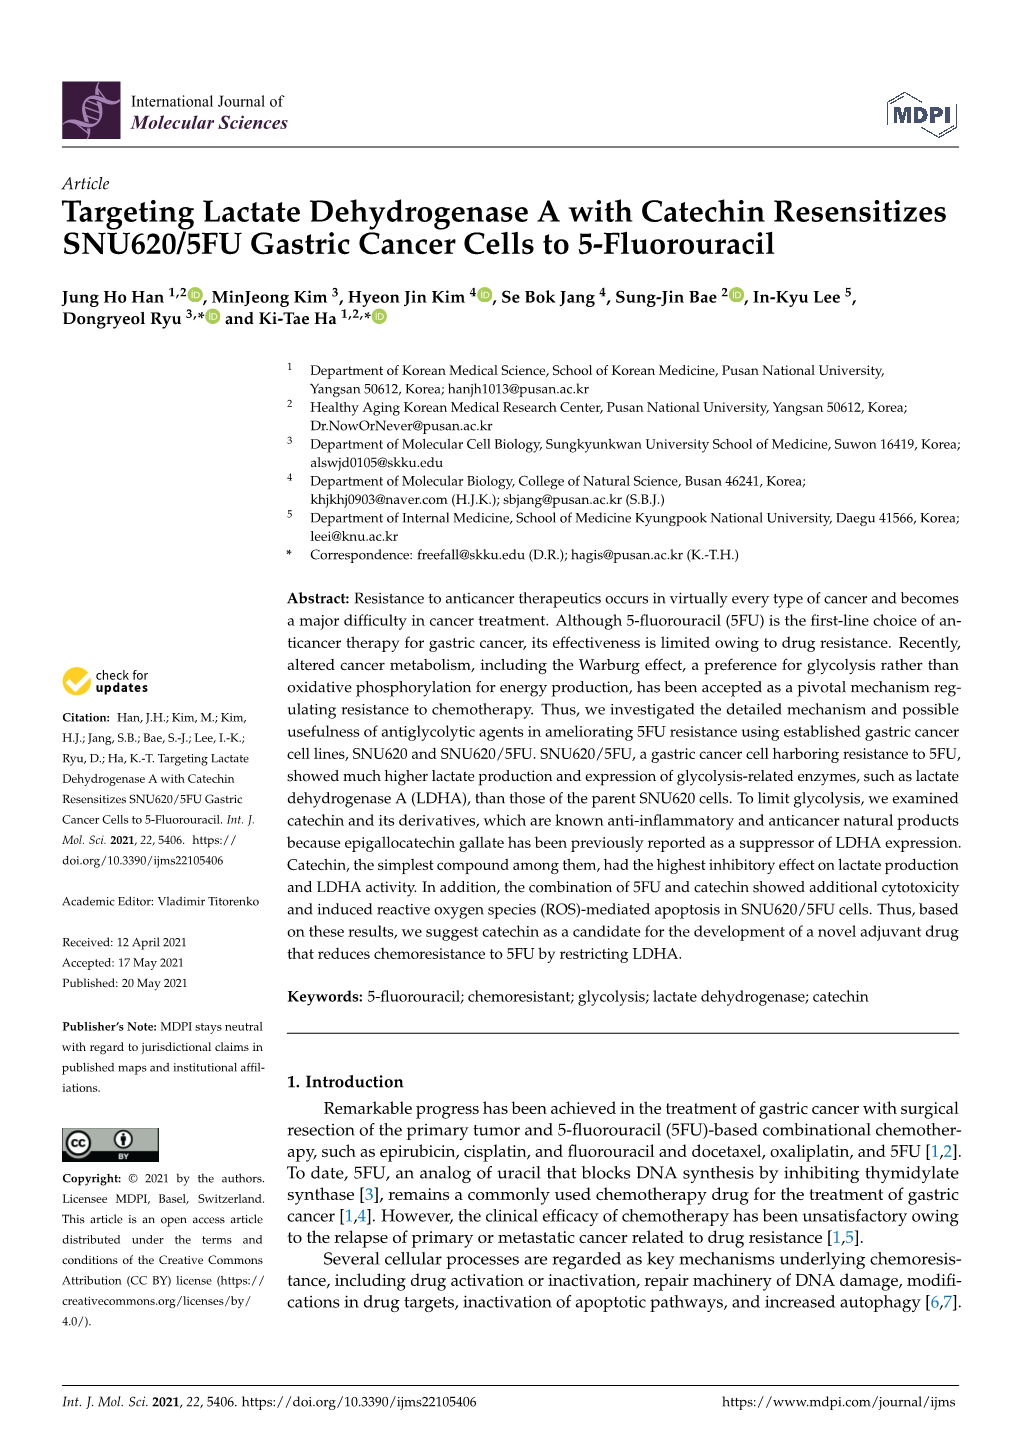 Targeting Lactate Dehydrogenase a with Catechin Resensitizes SNU620/5FU Gastric Cancer Cells to 5-Fluorouracil